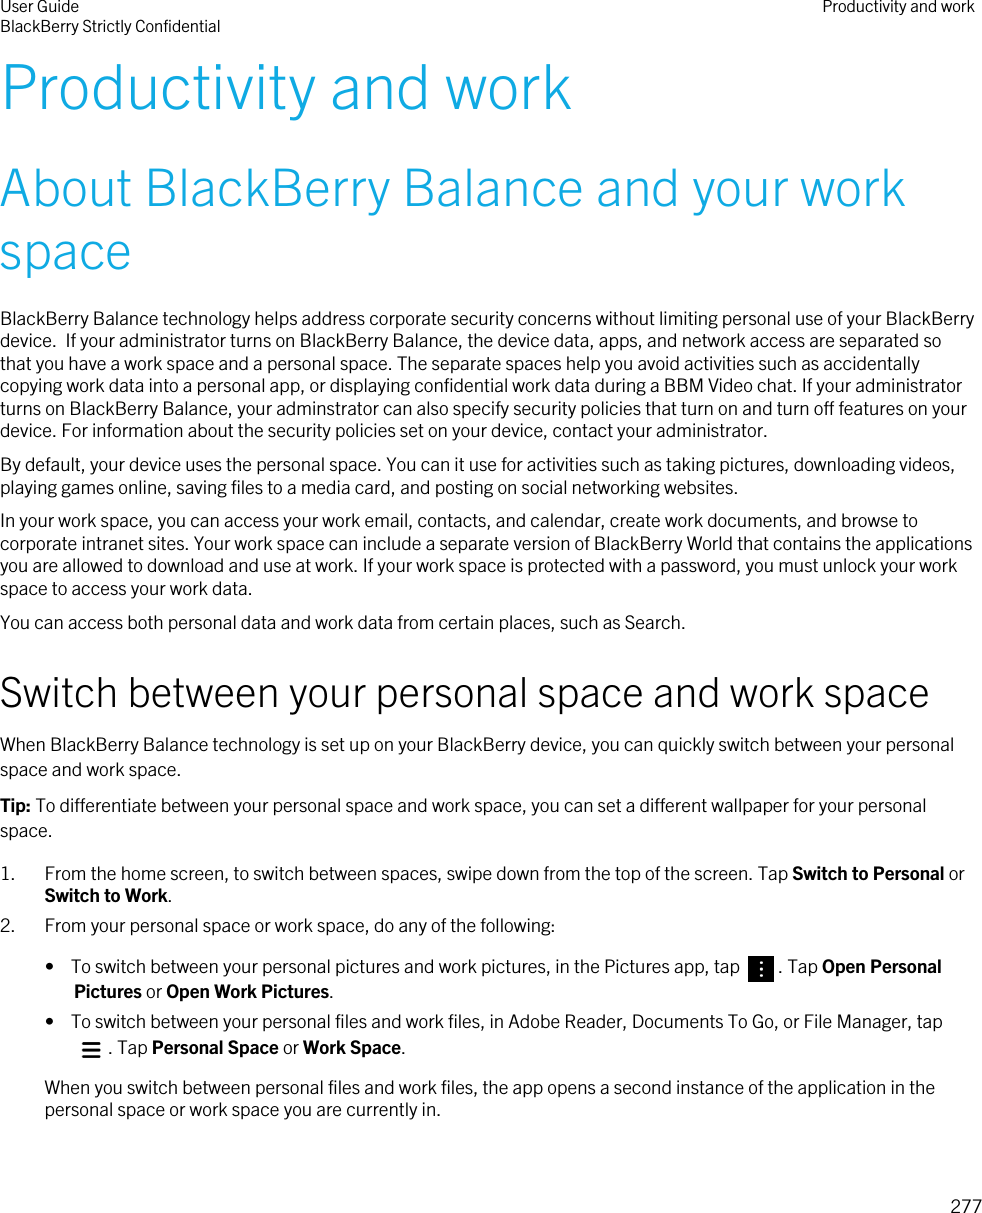 Productivity and workAbout BlackBerry Balance and your work spaceBlackBerry Balance technology helps address corporate security concerns without limiting personal use of your BlackBerry device.  If your administrator turns on BlackBerry Balance, the device data, apps, and network access are separated so that you have a work space and a personal space. The separate spaces help you avoid activities such as accidentally copying work data into a personal app, or displaying confidential work data during a BBM Video chat. If your administrator turns on BlackBerry Balance, your adminstrator can also specify security policies that turn on and turn off features on your device. For information about the security policies set on your device, contact your administrator.By default, your device uses the personal space. You can it use for activities such as taking pictures, downloading videos, playing games online, saving files to a media card, and posting on social networking websites.In your work space, you can access your work email, contacts, and calendar, create work documents, and browse to corporate intranet sites. Your work space can include a separate version of BlackBerry World that contains the applications you are allowed to download and use at work. If your work space is protected with a password, you must unlock your work space to access your work data.You can access both personal data and work data from certain places, such as Search. Switch between your personal space and work spaceWhen BlackBerry Balance technology is set up on your BlackBerry device, you can quickly switch between your personal space and work space.Tip: To differentiate between your personal space and work space, you can set a different wallpaper for your personal space.1. From the home screen, to switch between spaces, swipe down from the top of the screen. Tap Switch to Personal or Switch to Work.2. From your personal space or work space, do any of the following:•  To switch between your personal pictures and work pictures, in the Pictures app, tap  . Tap Open Personal Pictures or Open Work Pictures.•  To switch between your personal files and work files, in Adobe Reader, Documents To Go, or File Manager, tap . Tap Personal Space or Work Space.When you switch between personal files and work files, the app opens a second instance of the application in the personal space or work space you are currently in.User GuideBlackBerry Strictly Confidential Productivity and work277